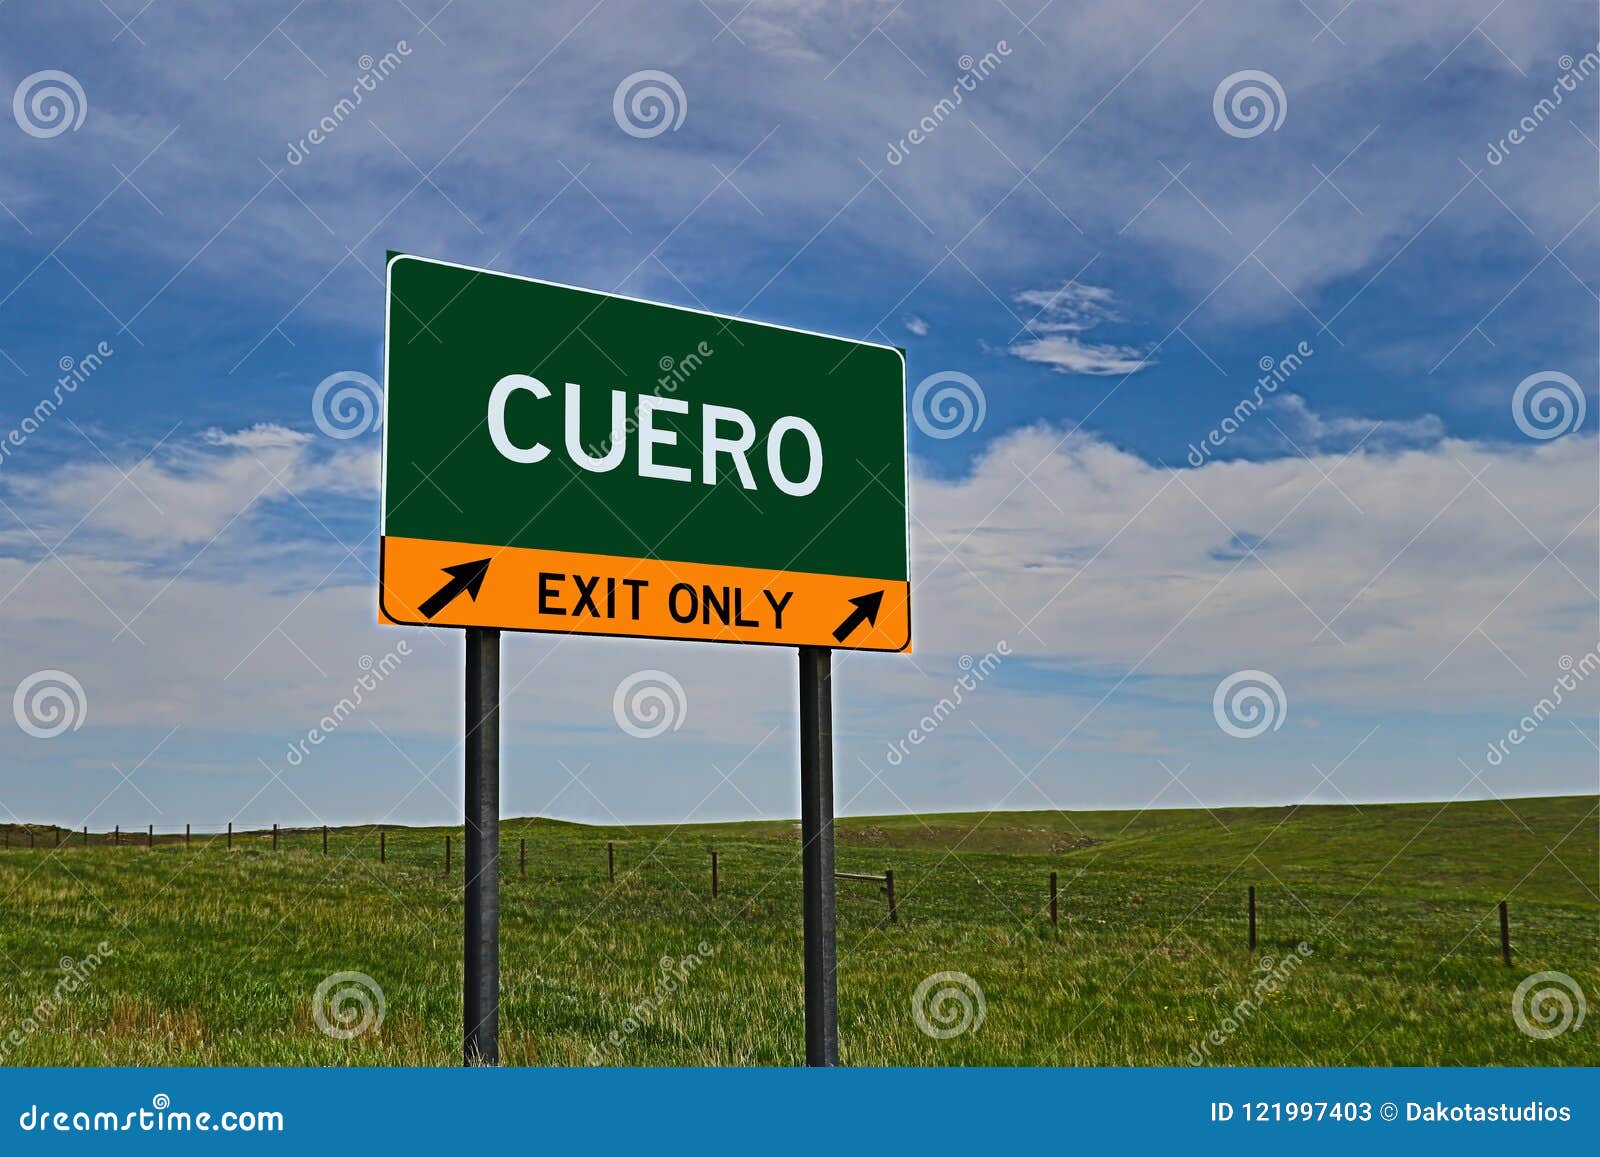 us highway exit sign for cuero